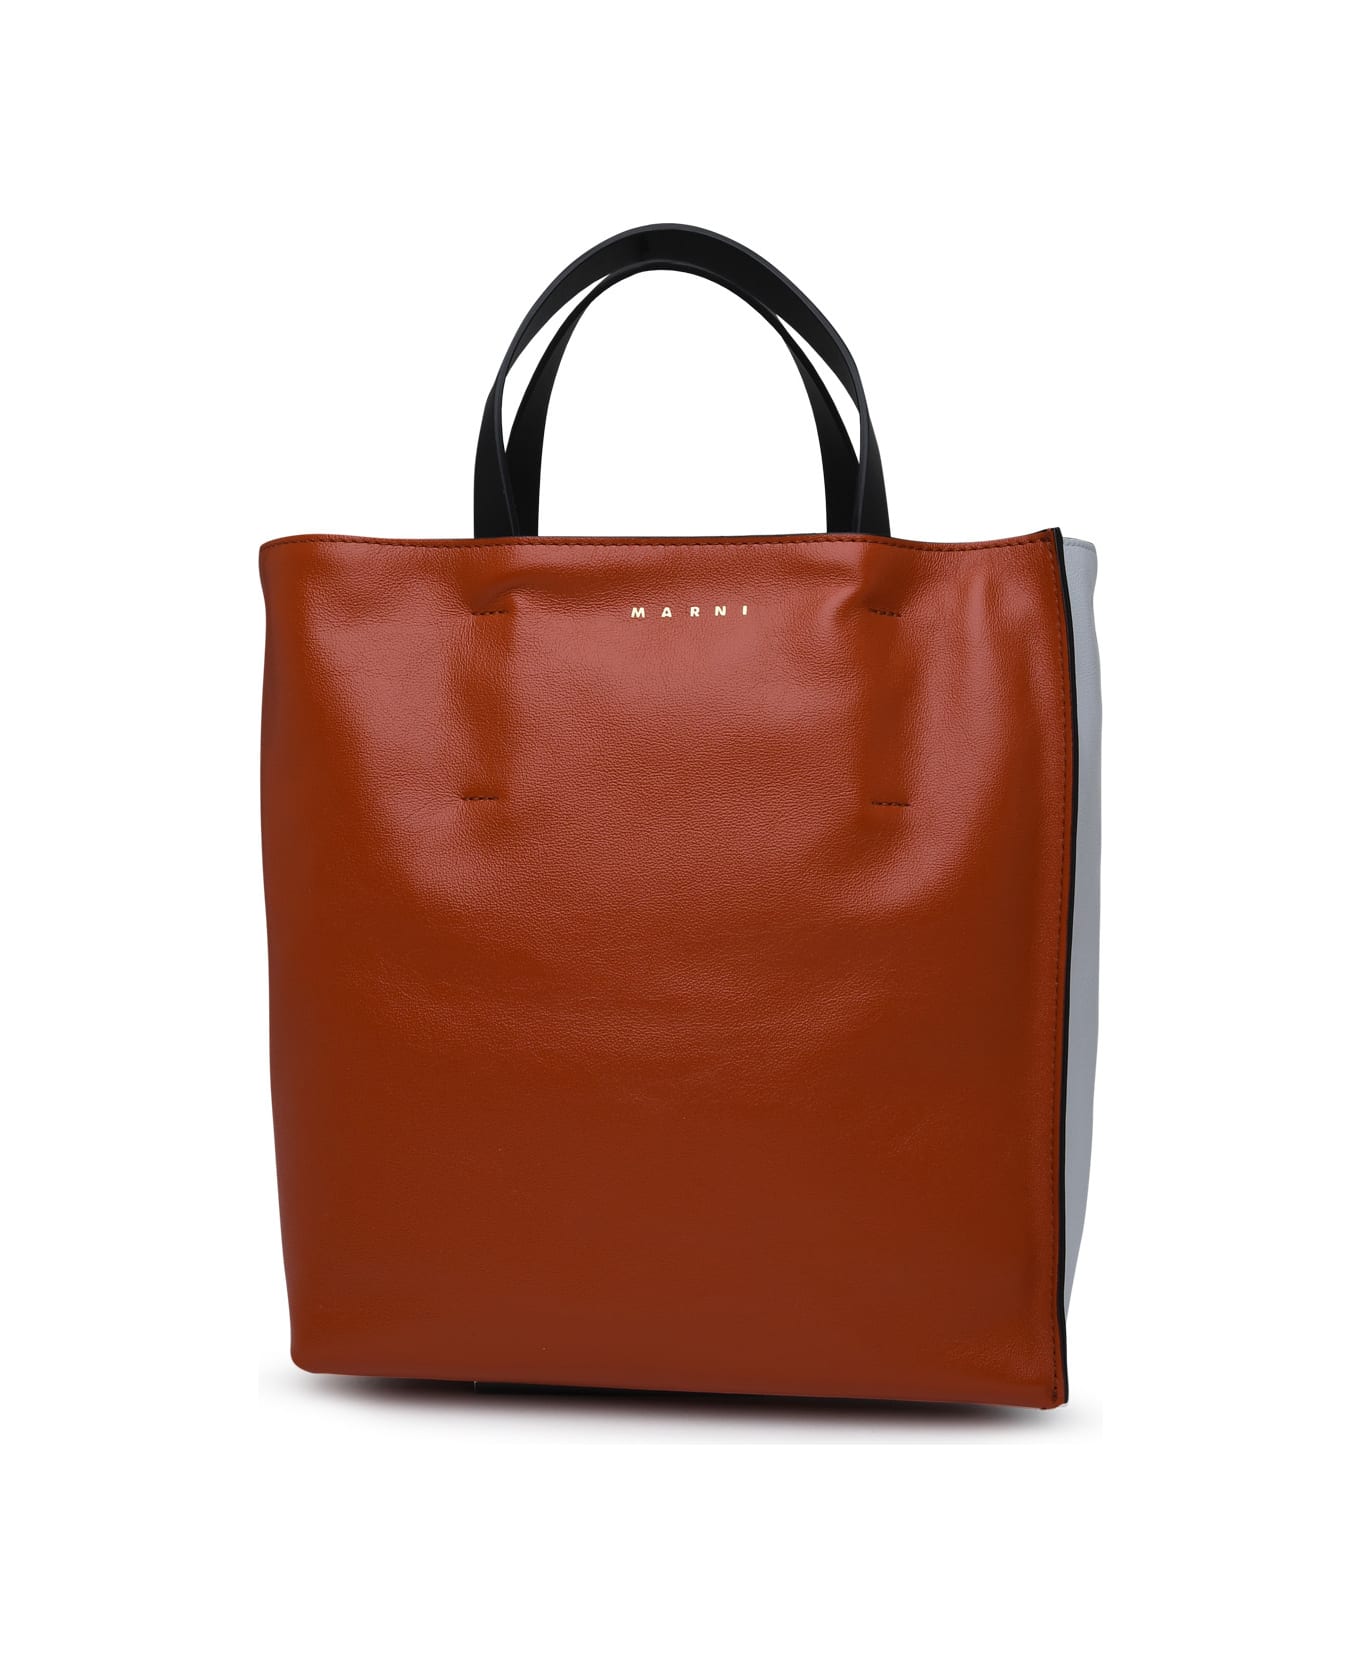 Marni Museo Bag In Black Leather - Rosso/nero トートバッグ